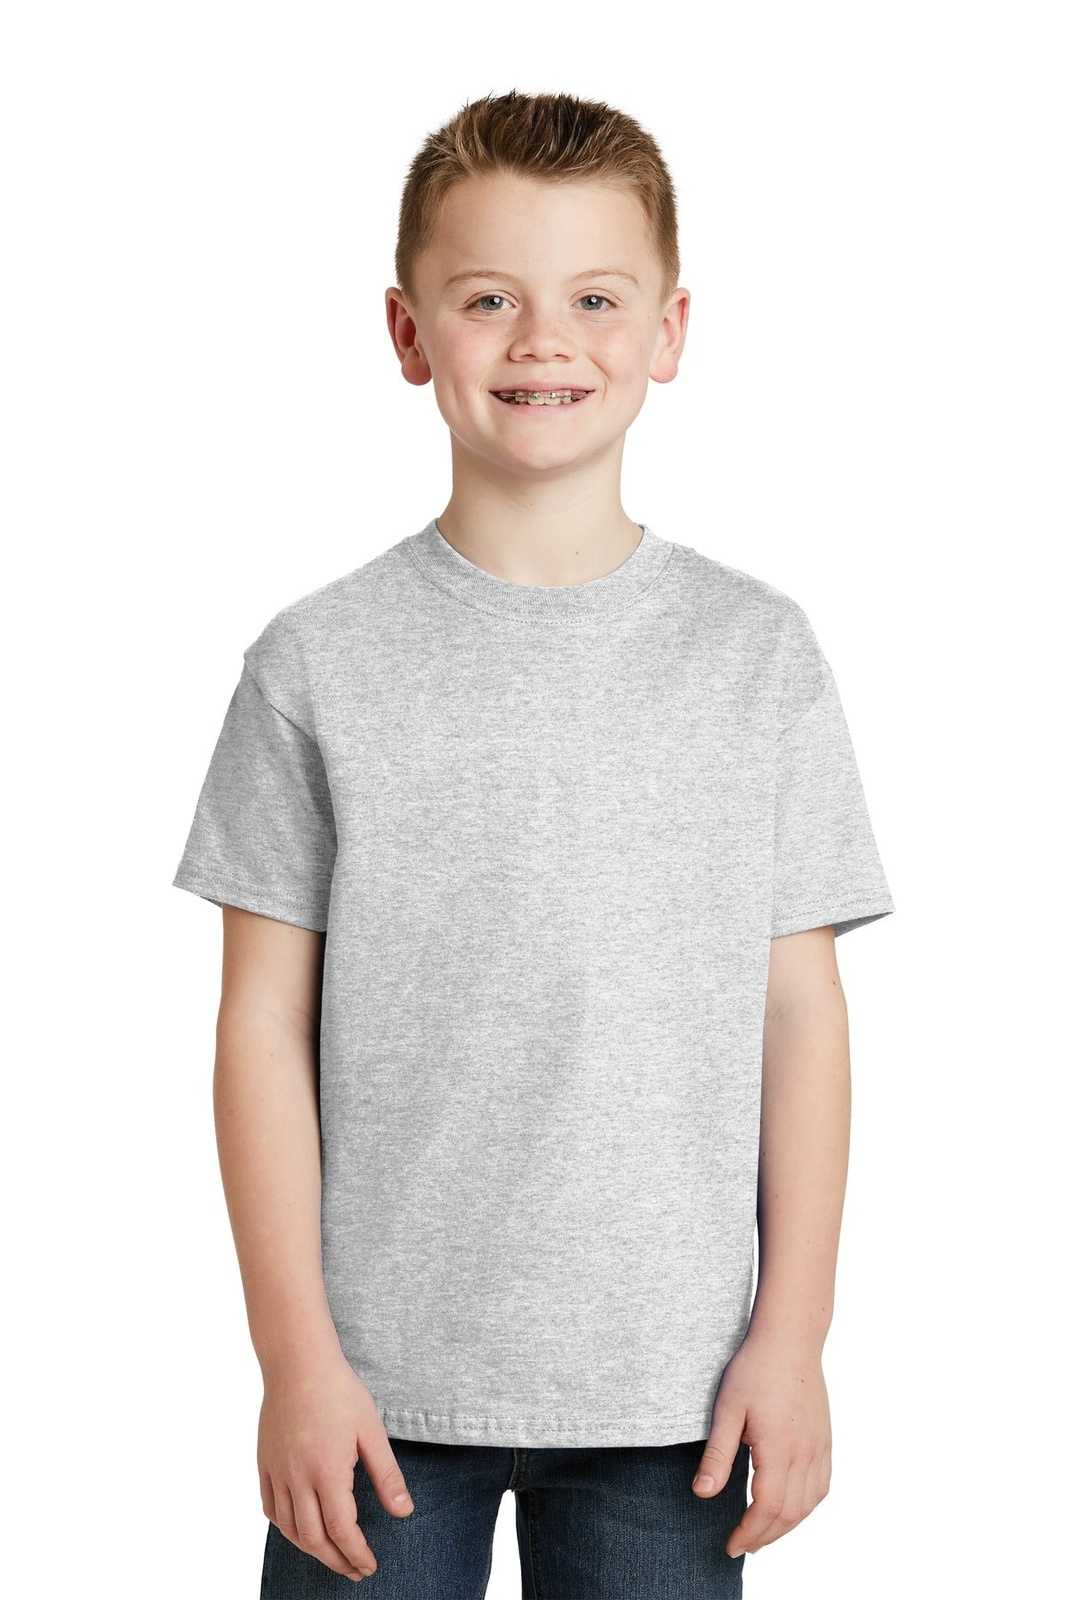 Hanes 5450 Youth Tagless 100% Cotton T-Shirt - Ash - HIT a Double